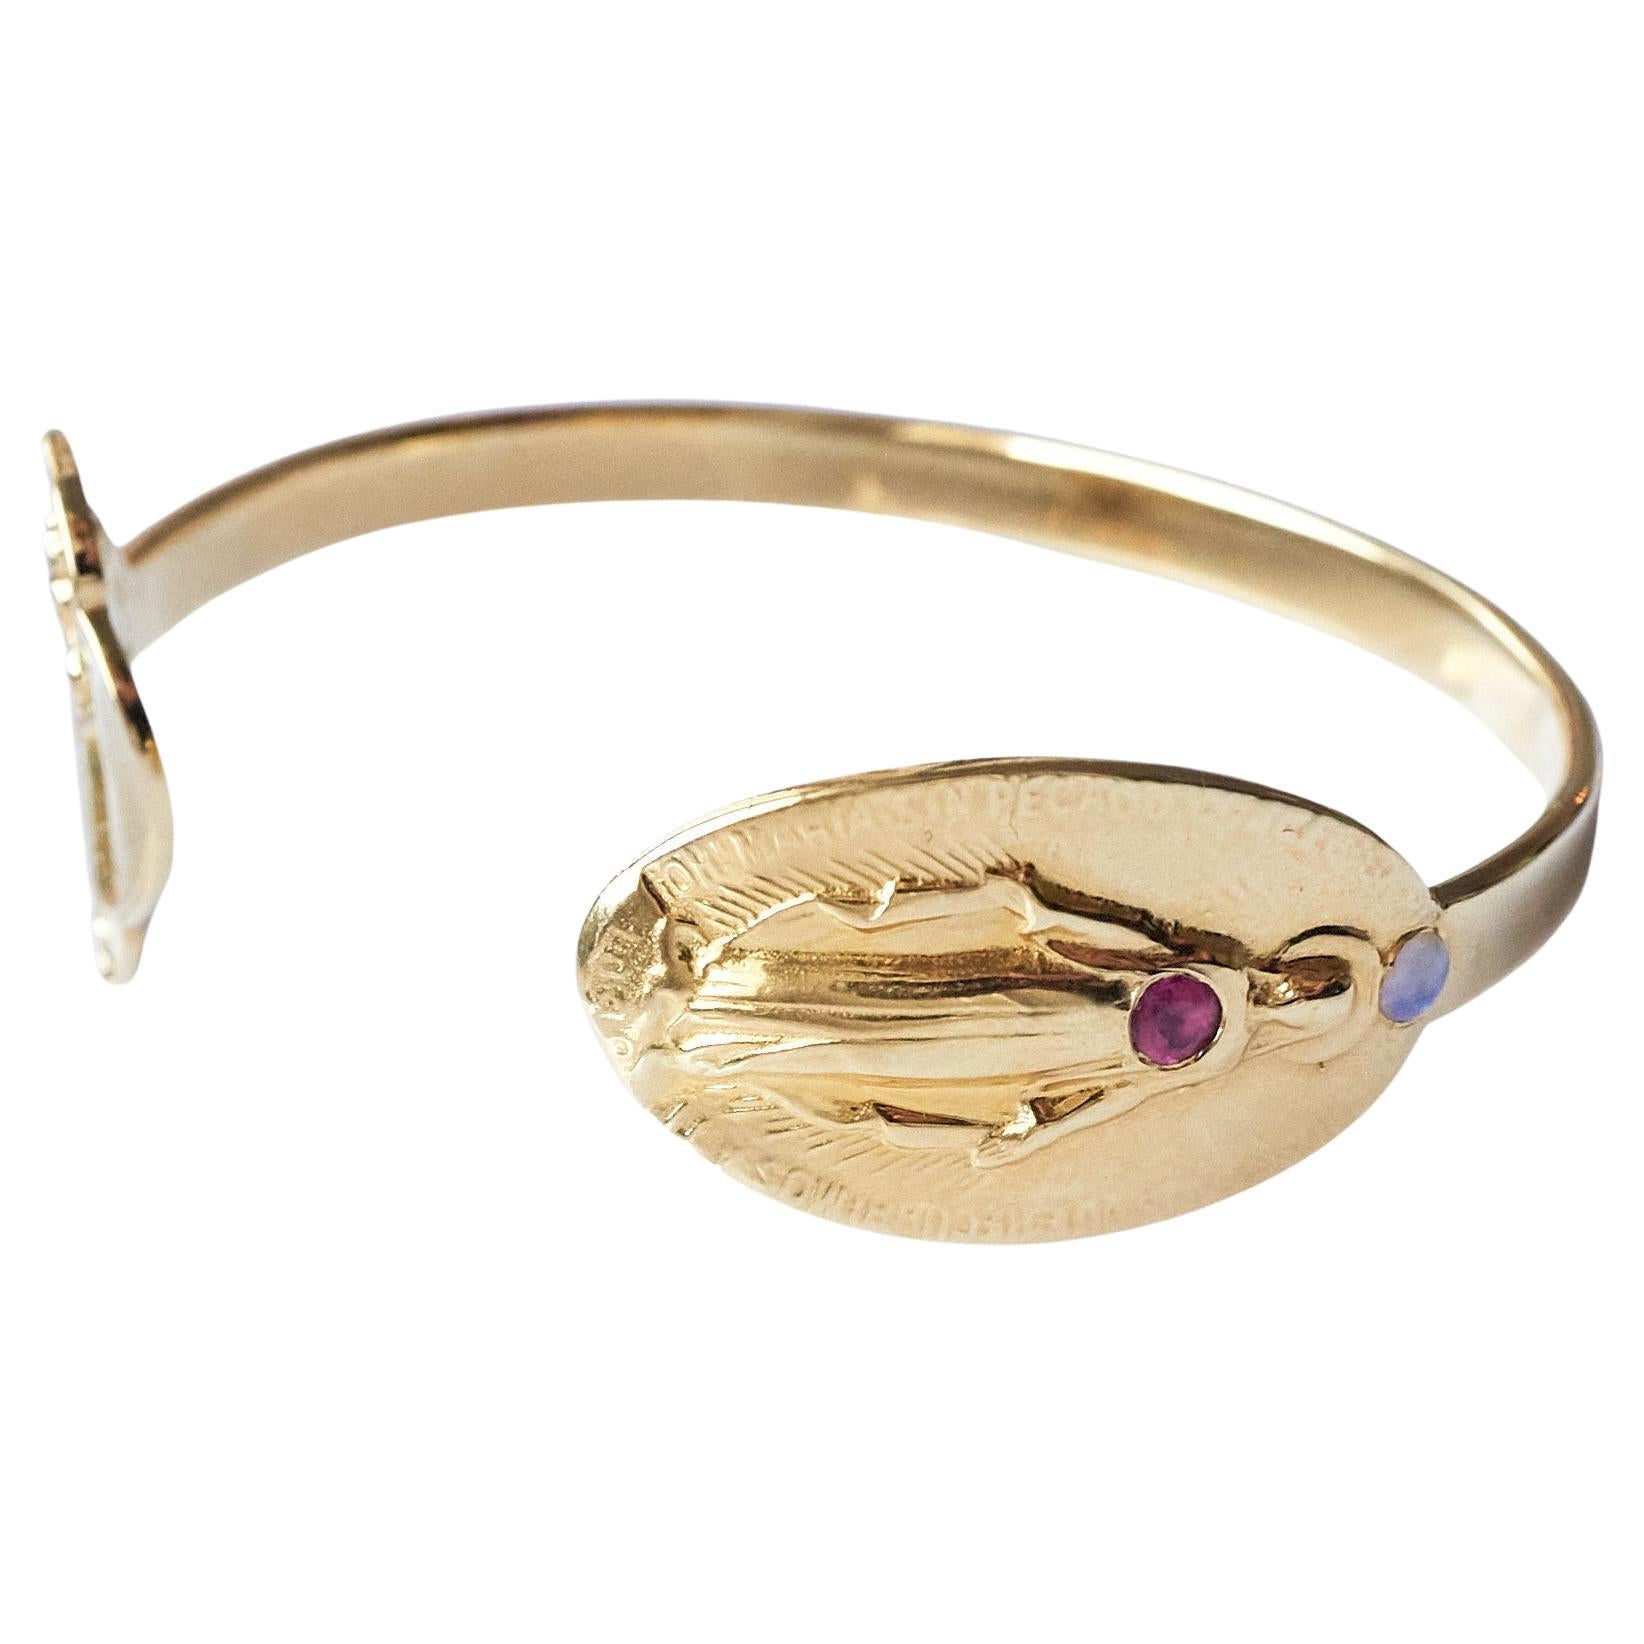 Tourmaline Opal Virgin Mary Bangle Bracelet Cuff Gold Vermeil Spiritual 

Virgin Mary With Pink Tourmaline set in the Heart and Opal above the head - The bracelet is open and has two medal on each side.
It is a Gold Vermeil Cuff  Bangle 
Designer: J